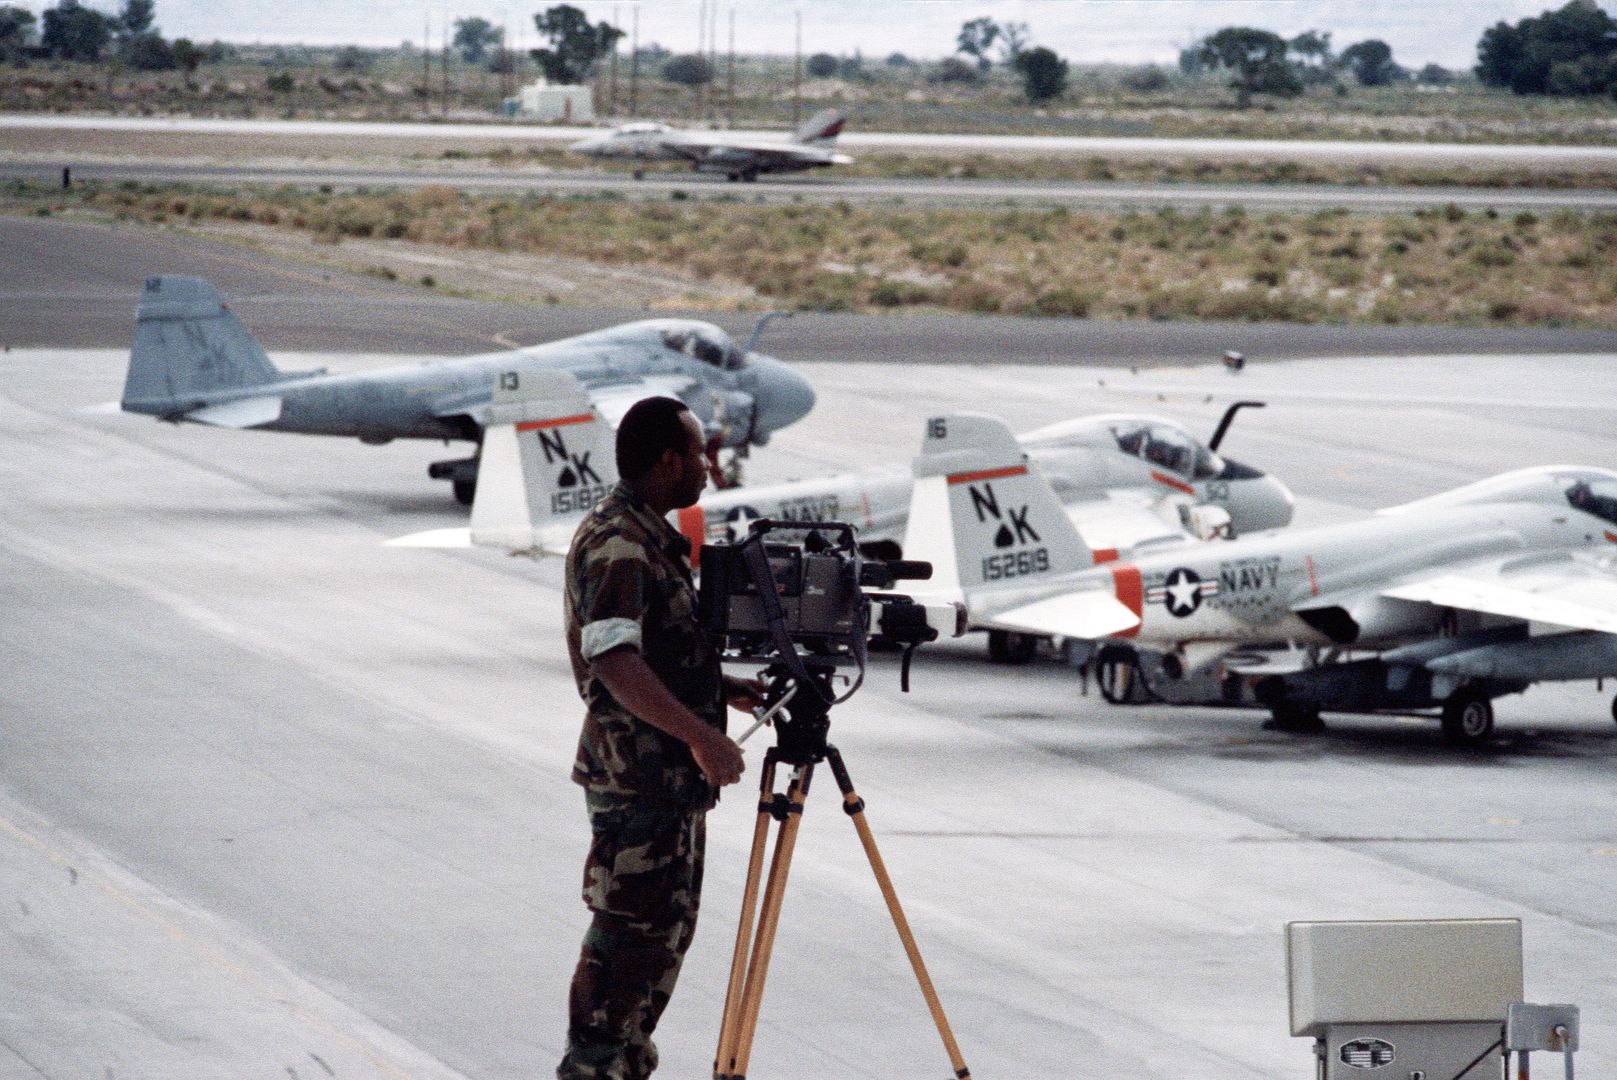 Standing Behind Them A Video Cameraman Films Three A 6 Intruder Aircraft On The Flight Line During Exercise GALLANT EAGLE 88